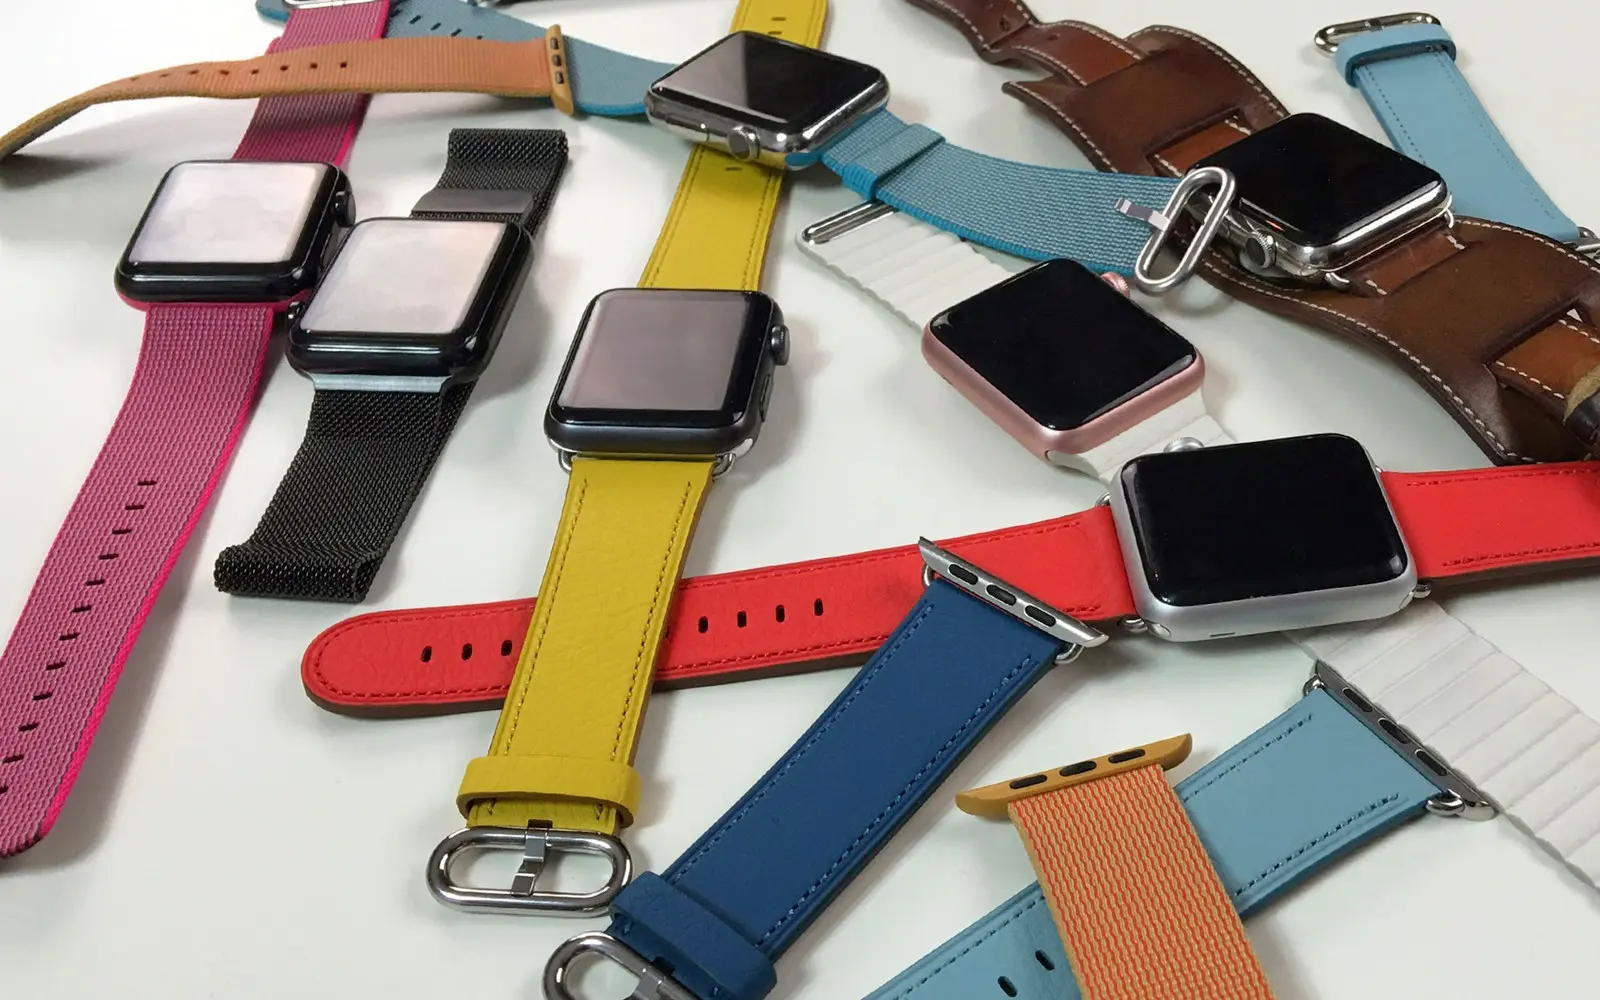 Apple-Watch-Series-2-Hands-On-Event-1